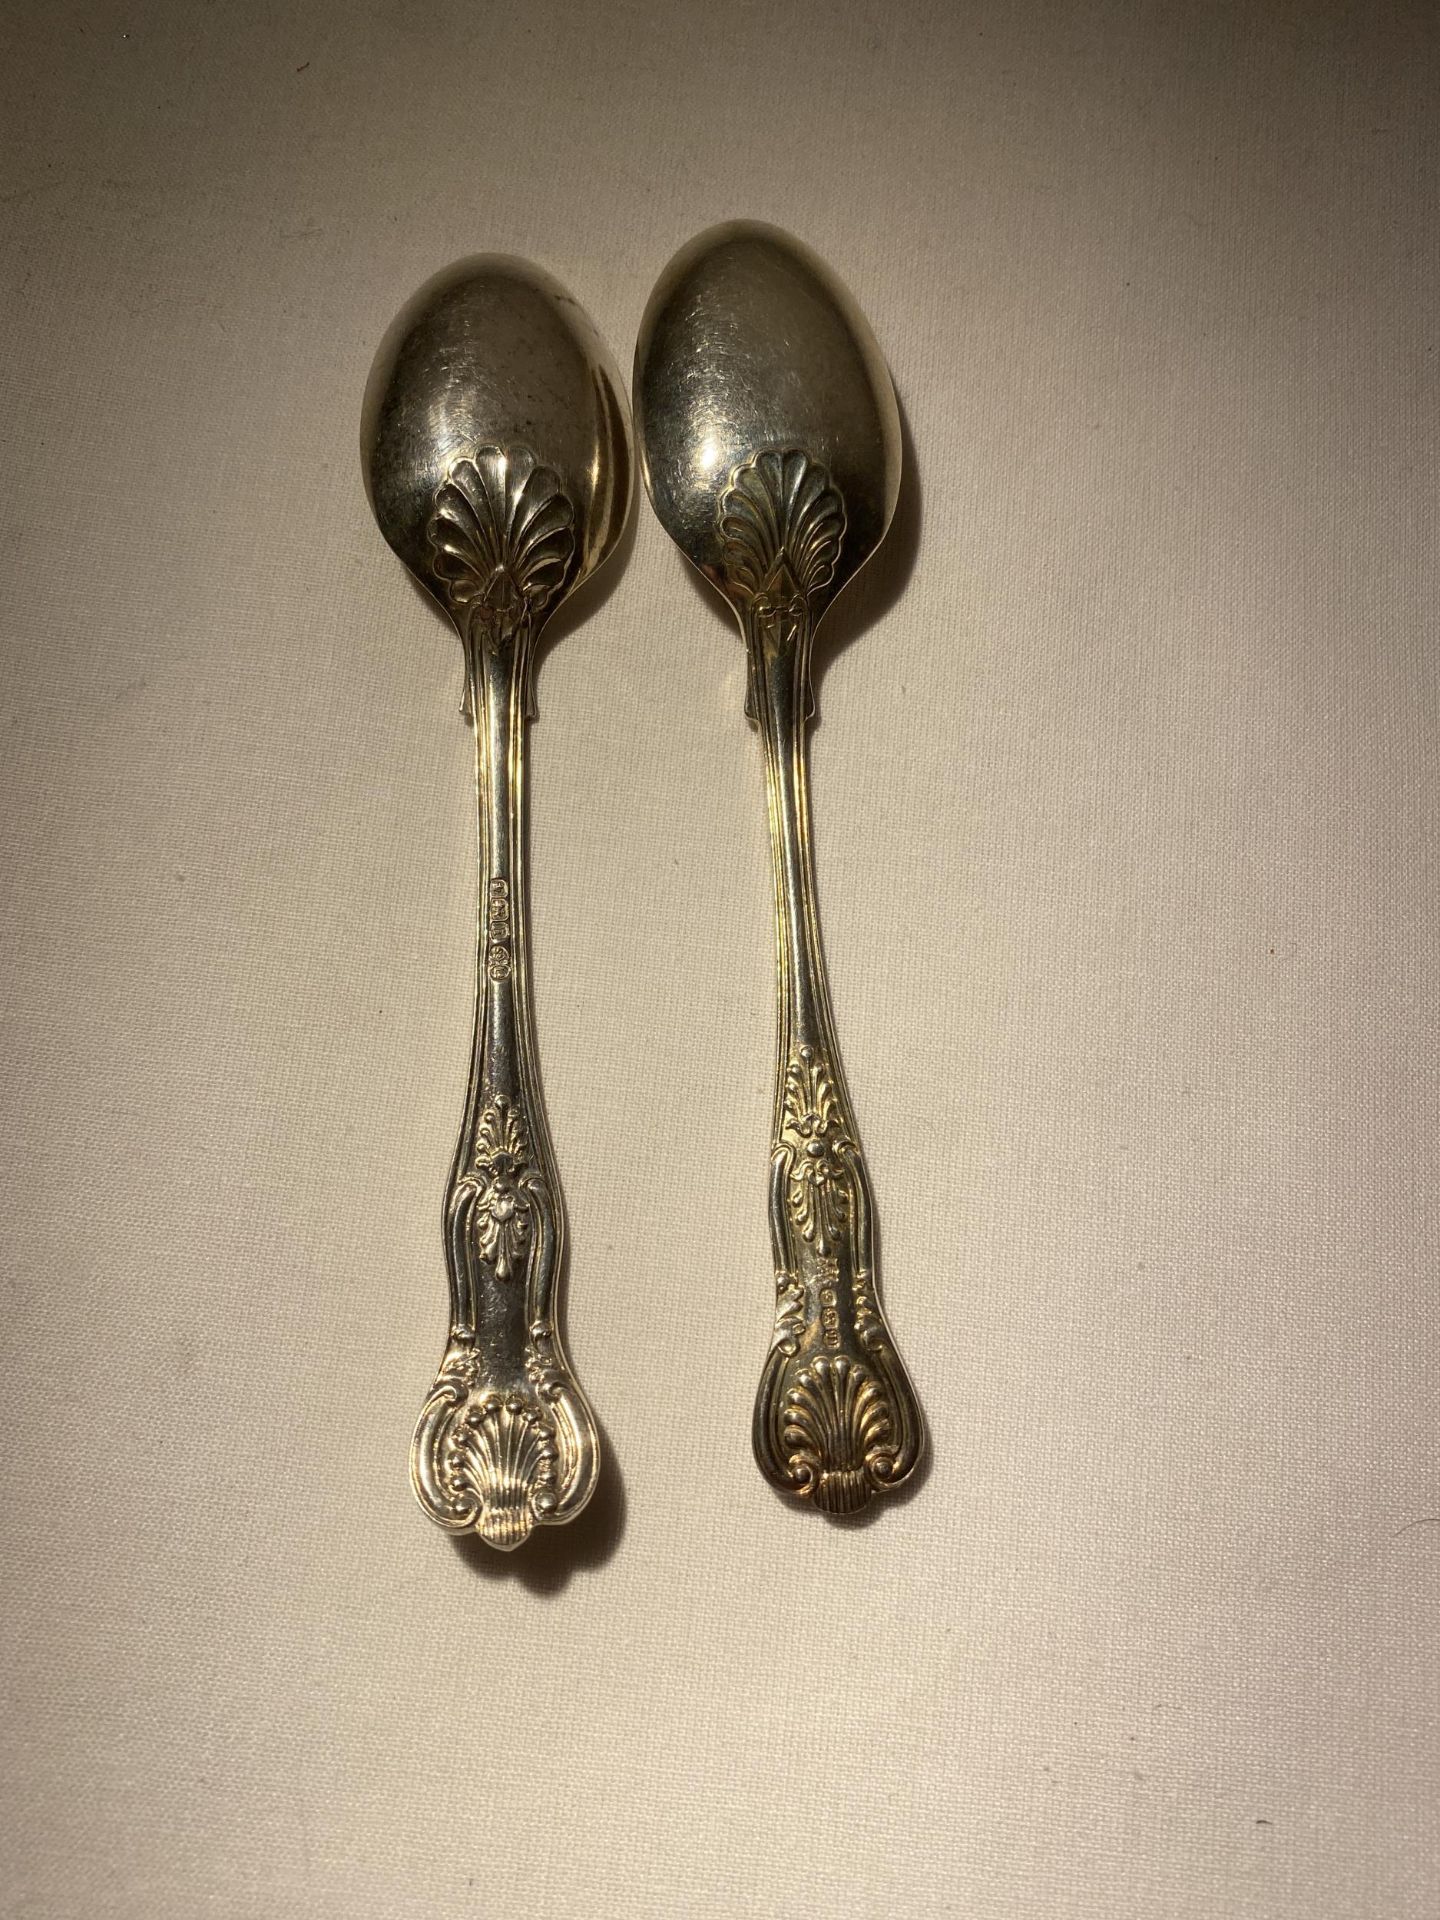 TWO SHEFFIELD HALLMARKED SILVER SPOONS, EARLIEST BEING 1925, MAKER WILLIAM HUTTON & SONS LTD, - Image 10 of 18